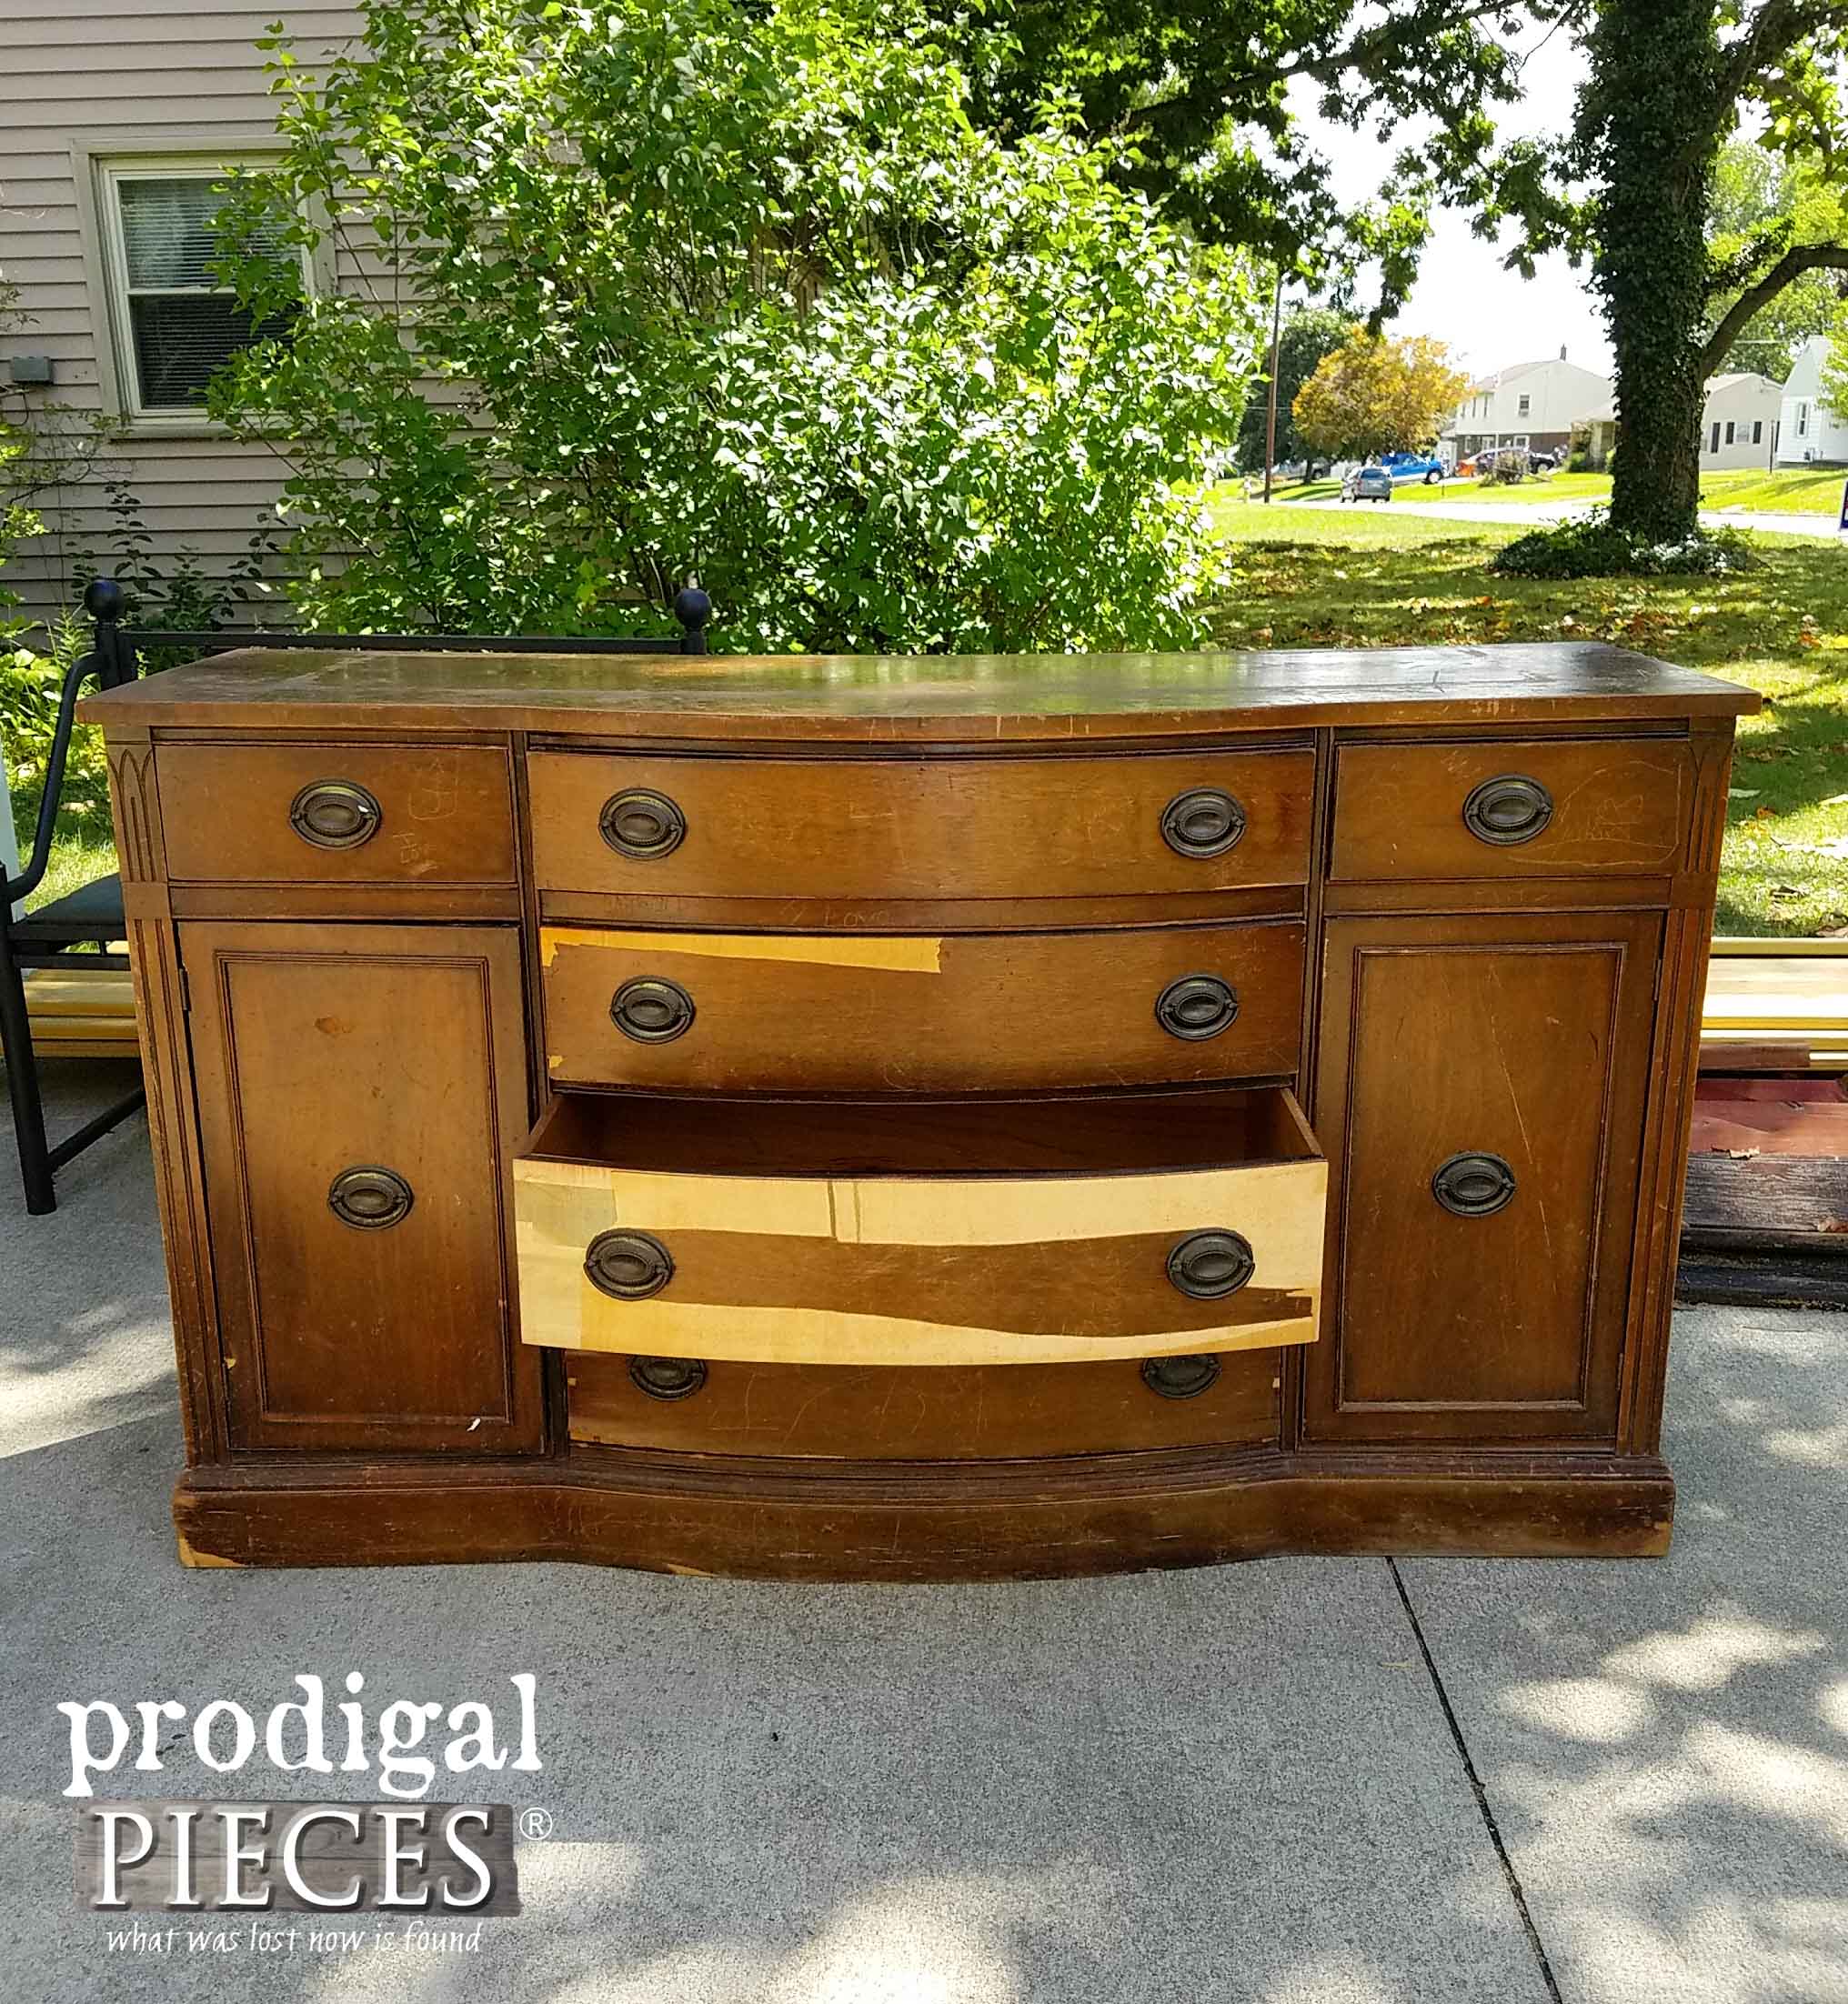 Vintage Drexel Buffet Before Makeover by Prodigal Pieces | www.prodigalpieces.com